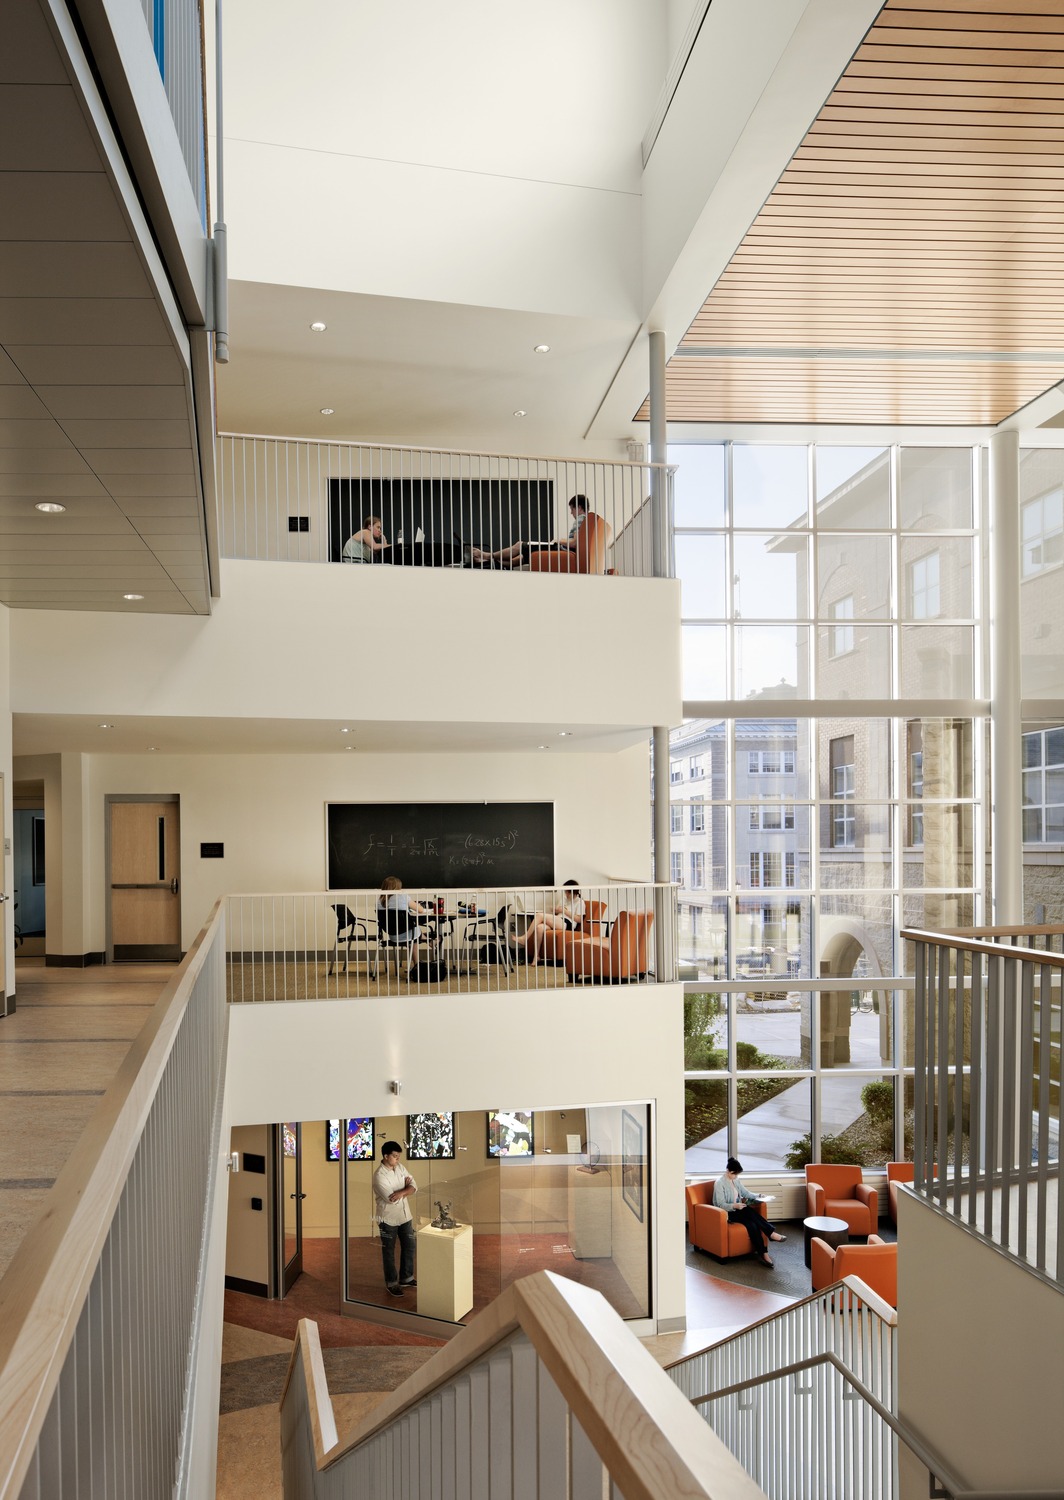 Multi-level atrium with soft seating and collaboration spaces